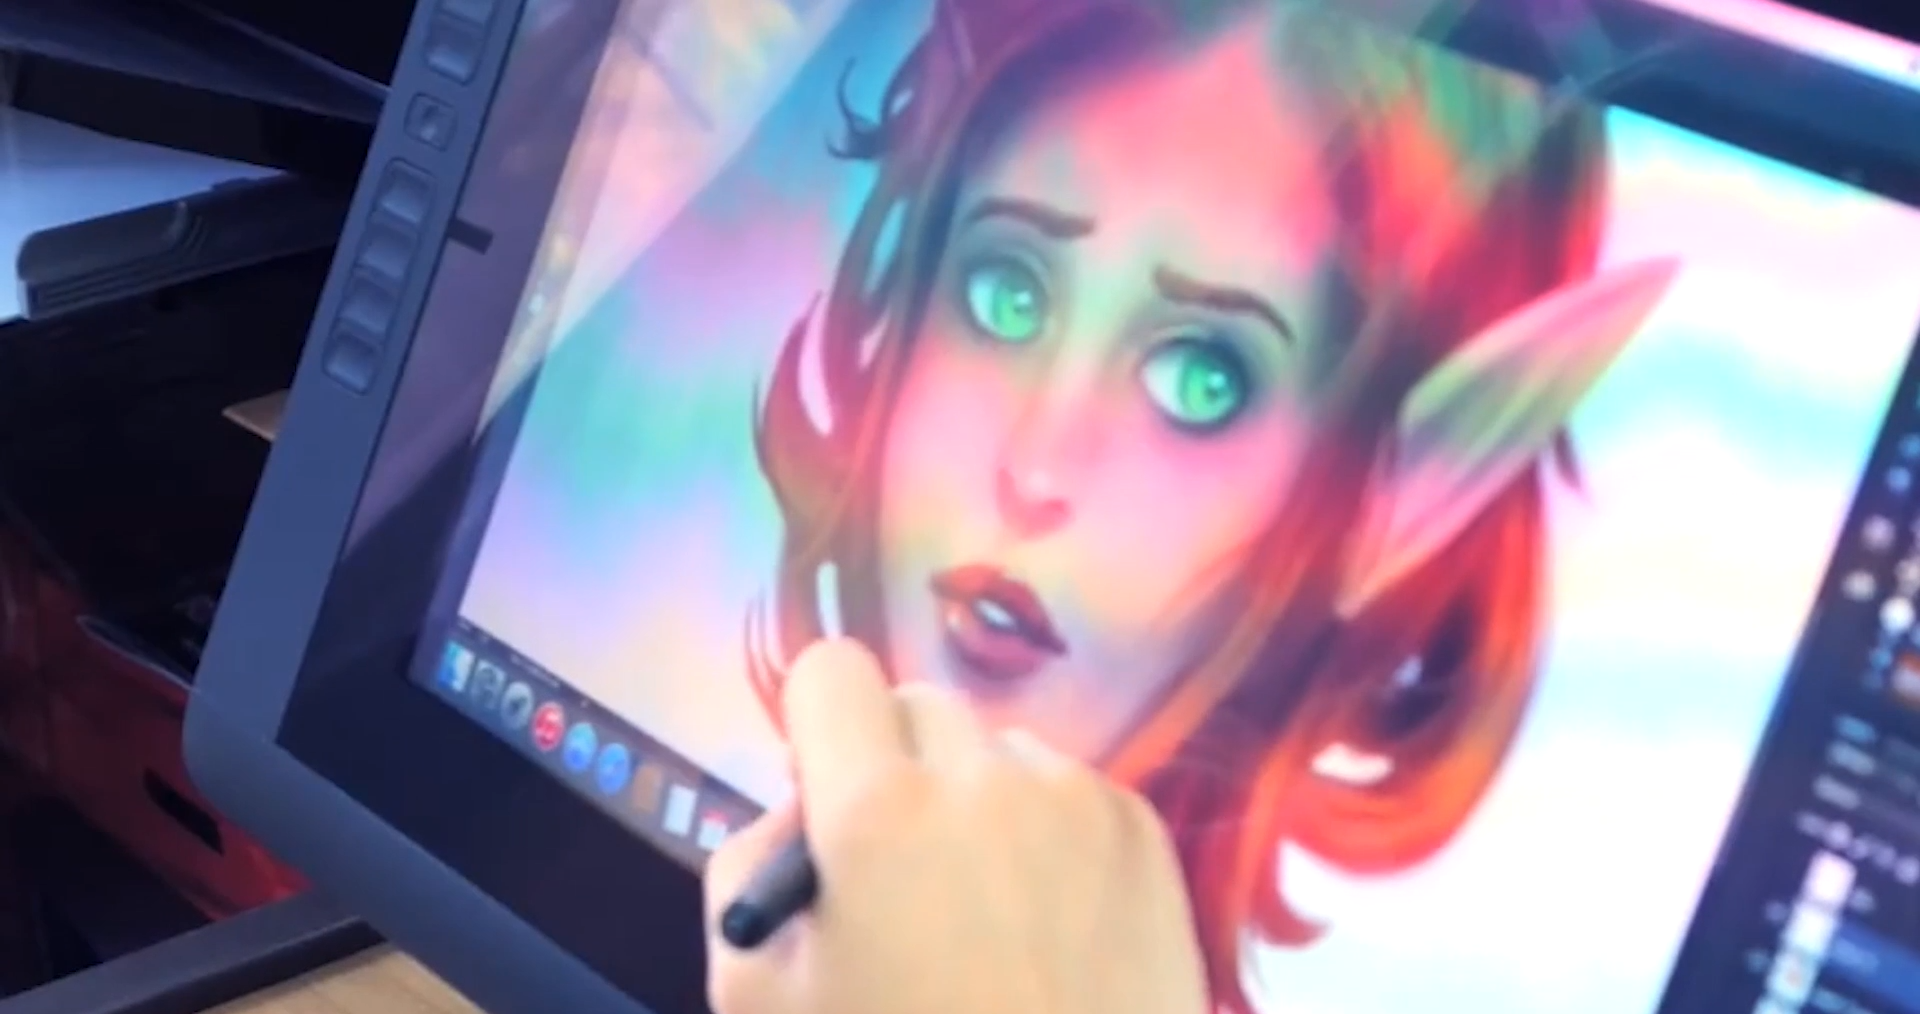 A person colouring a picture of a person on a computer screen